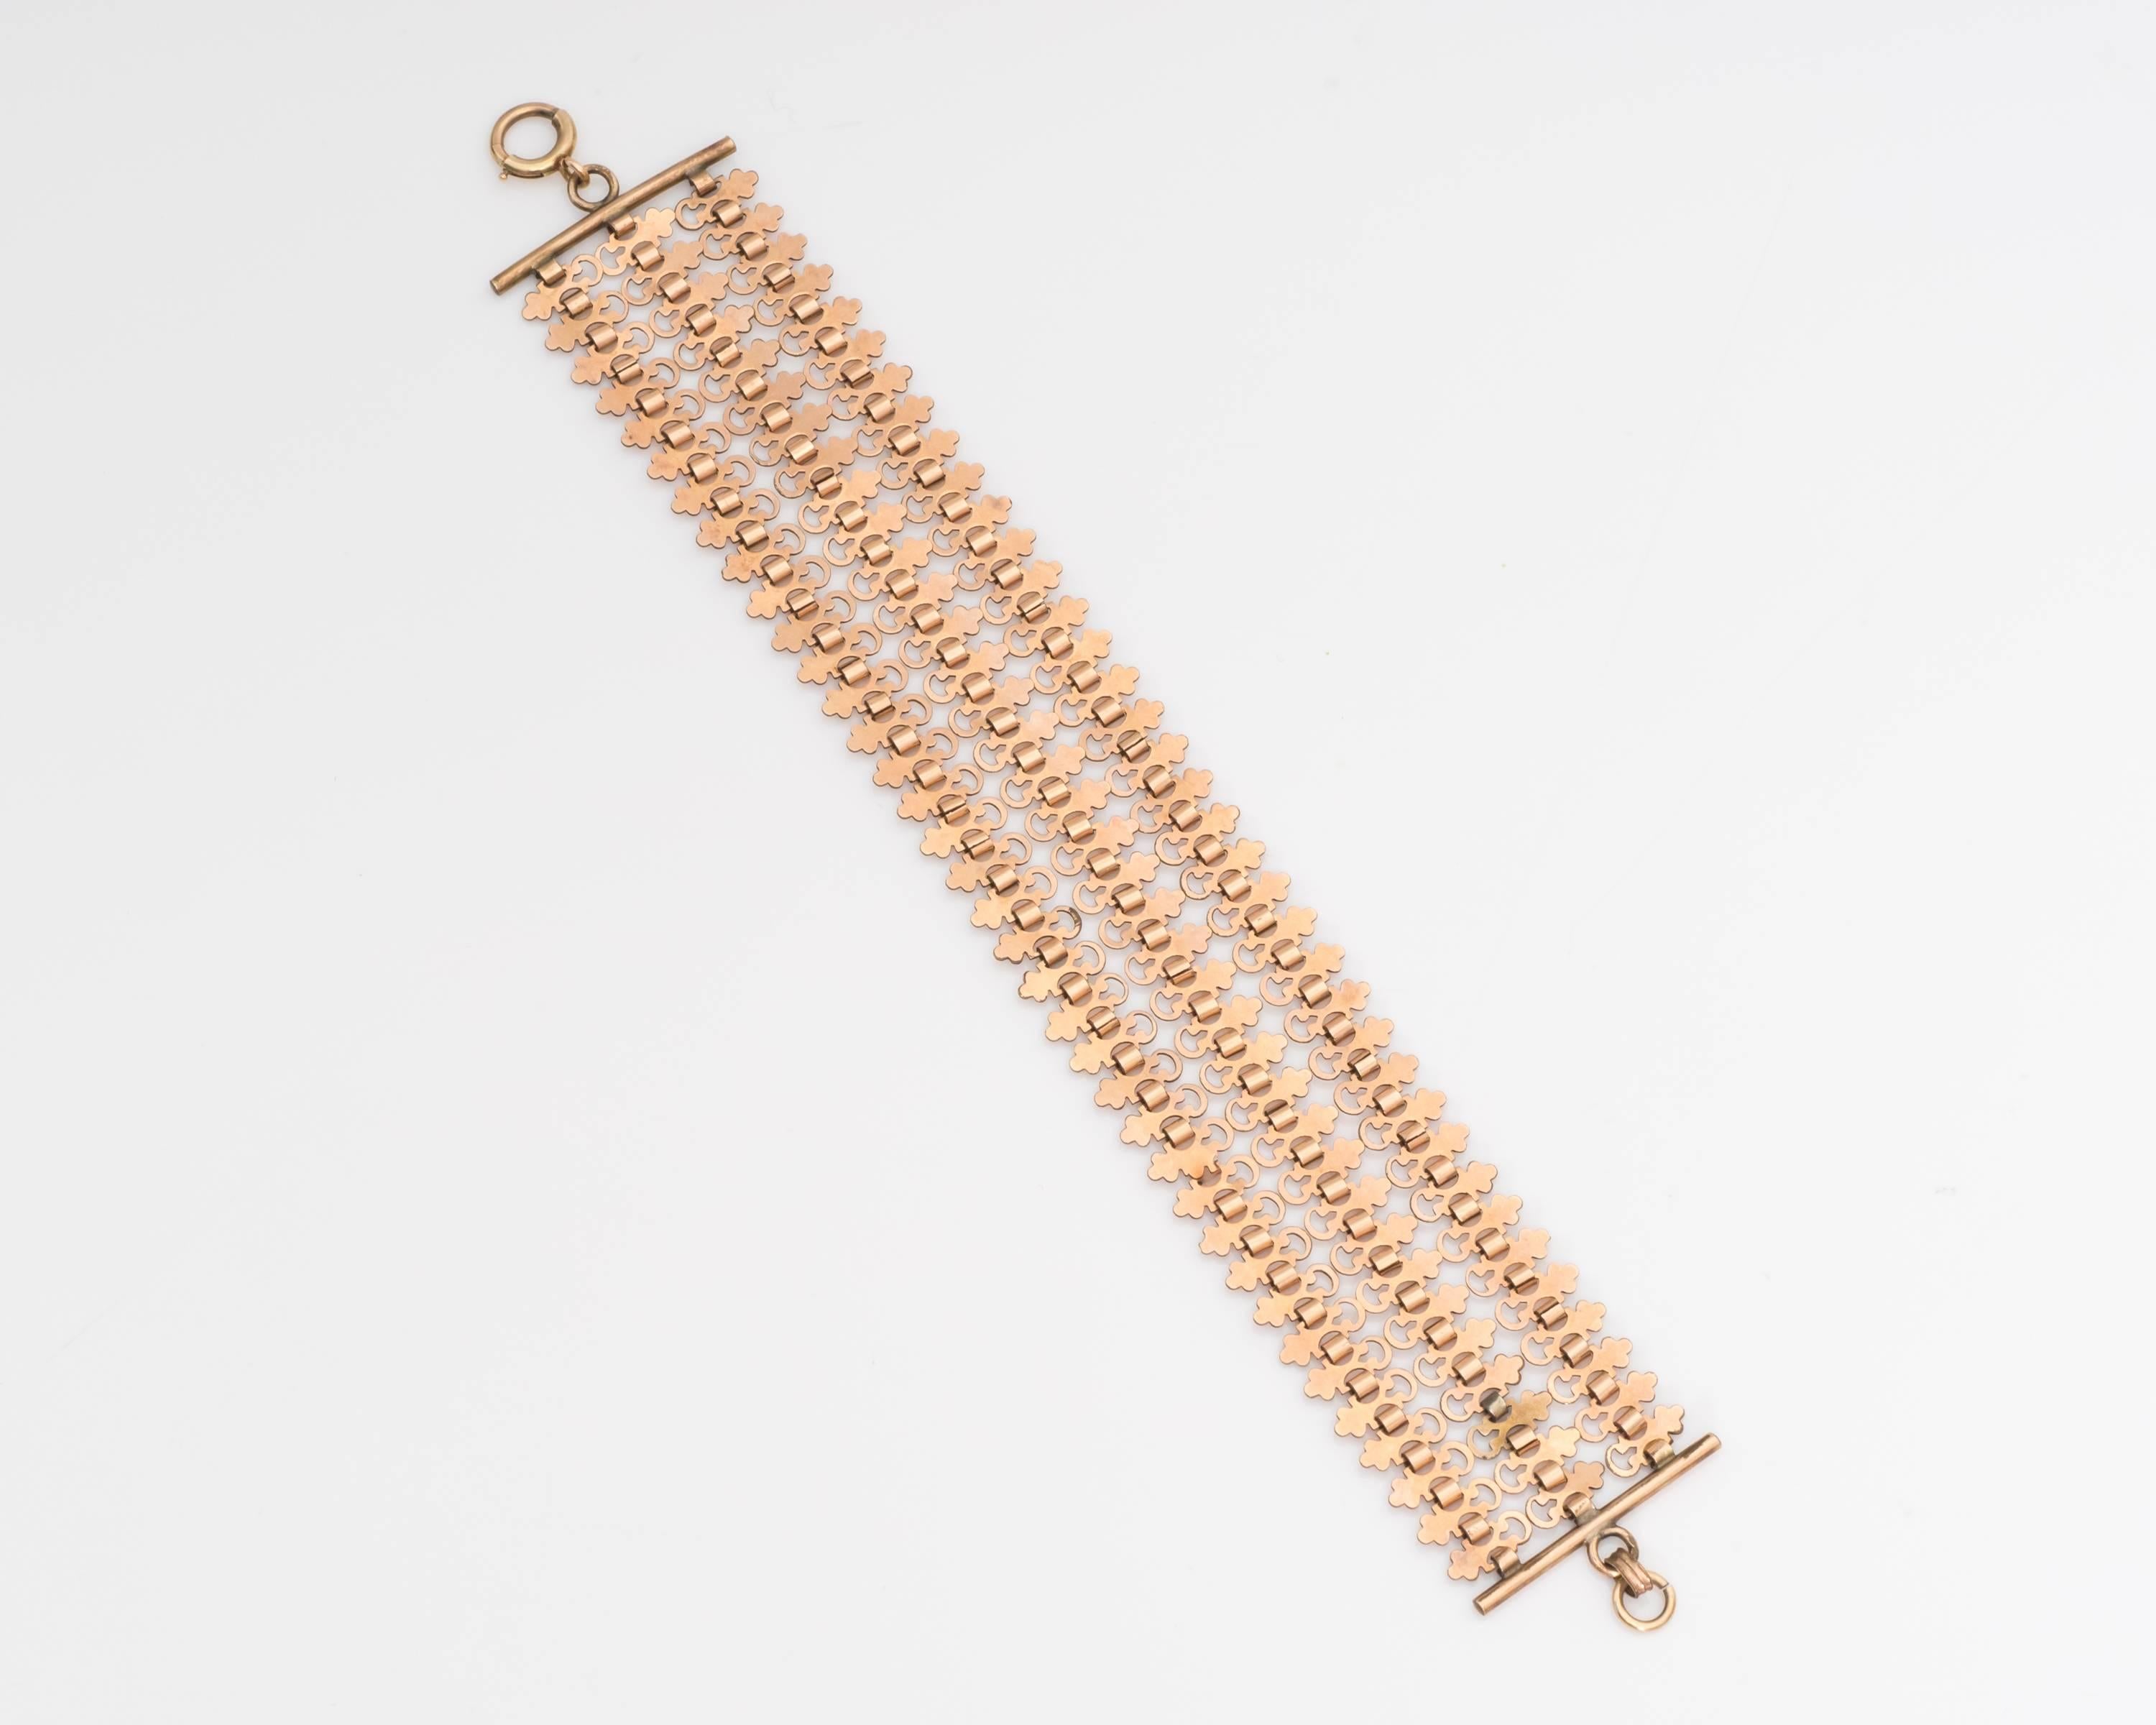 This beautiful bracelet, crafted in 10 karat rose gold, embodies whimsical characteristics. The time and dedication put into this piece is evident through the intricately carved links. The bracelet is connected through tiny chain links with a